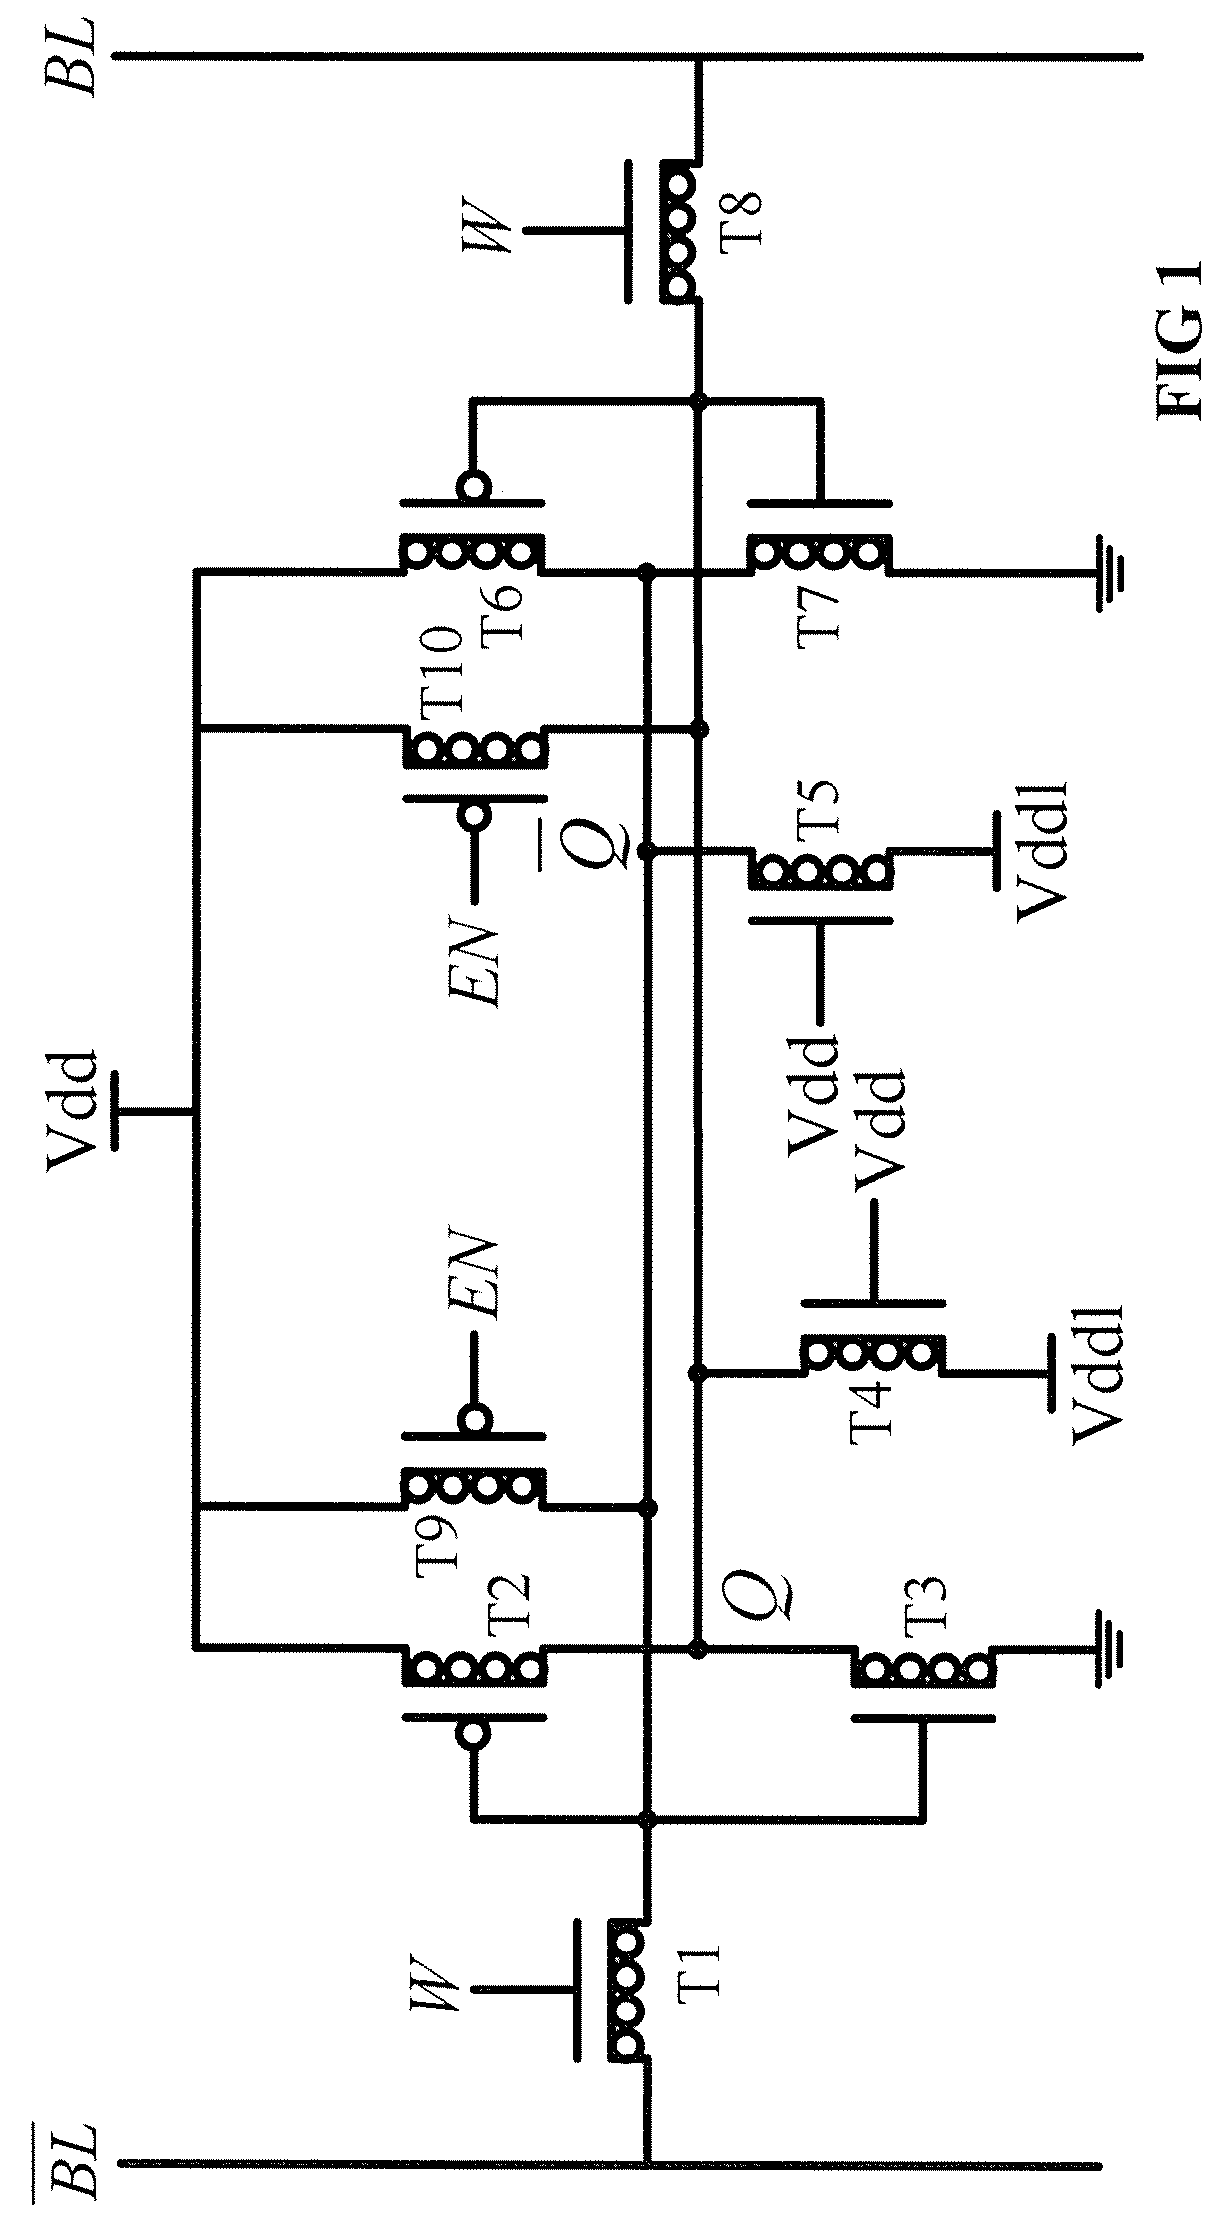 Ternary puf unit and circuit realized by cnfet